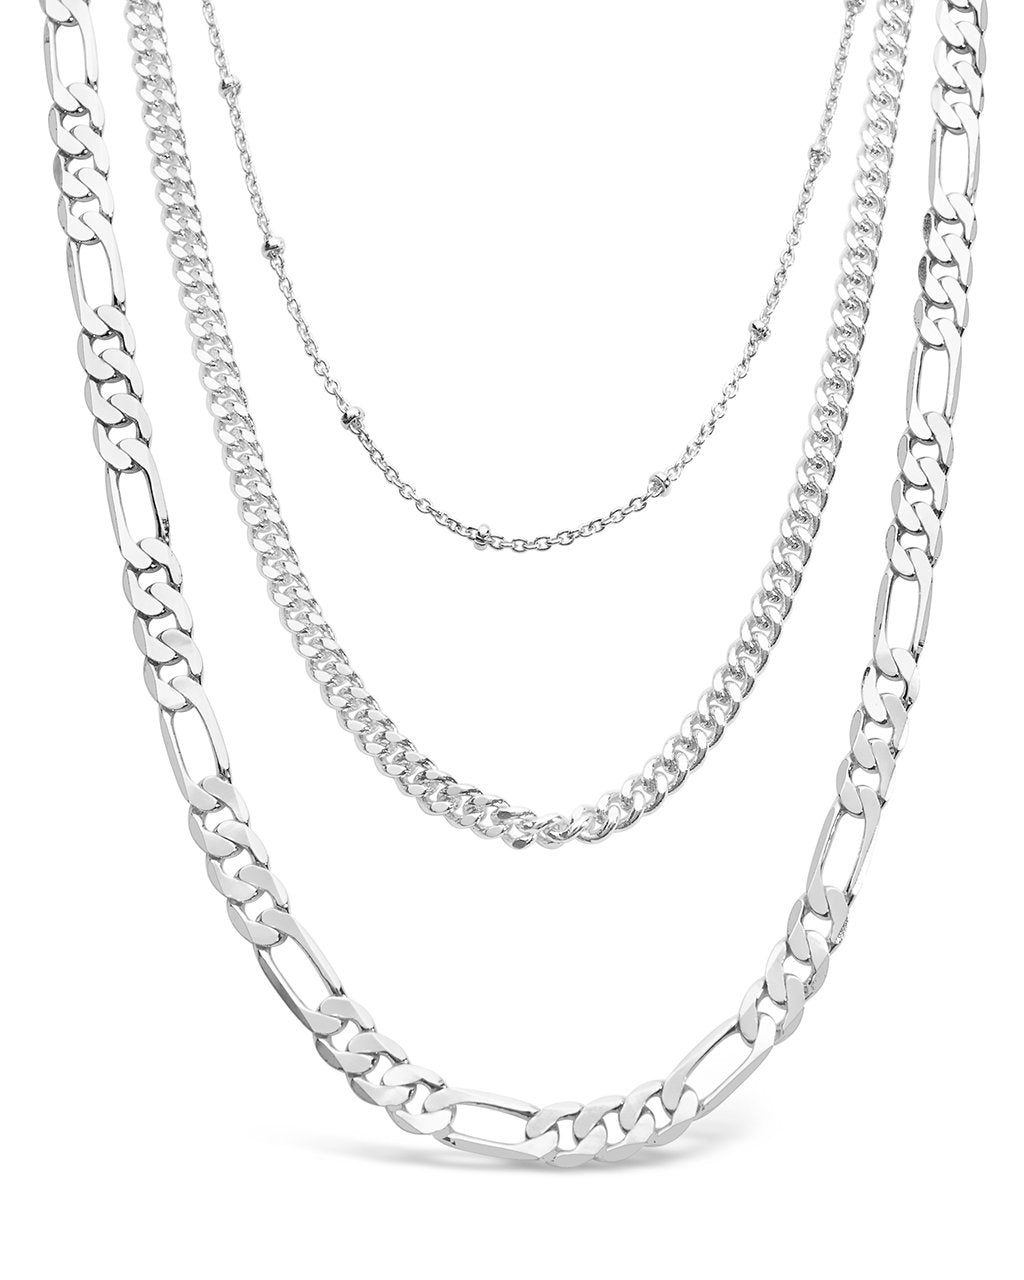 Simple Layered Chains - Sterling Forever